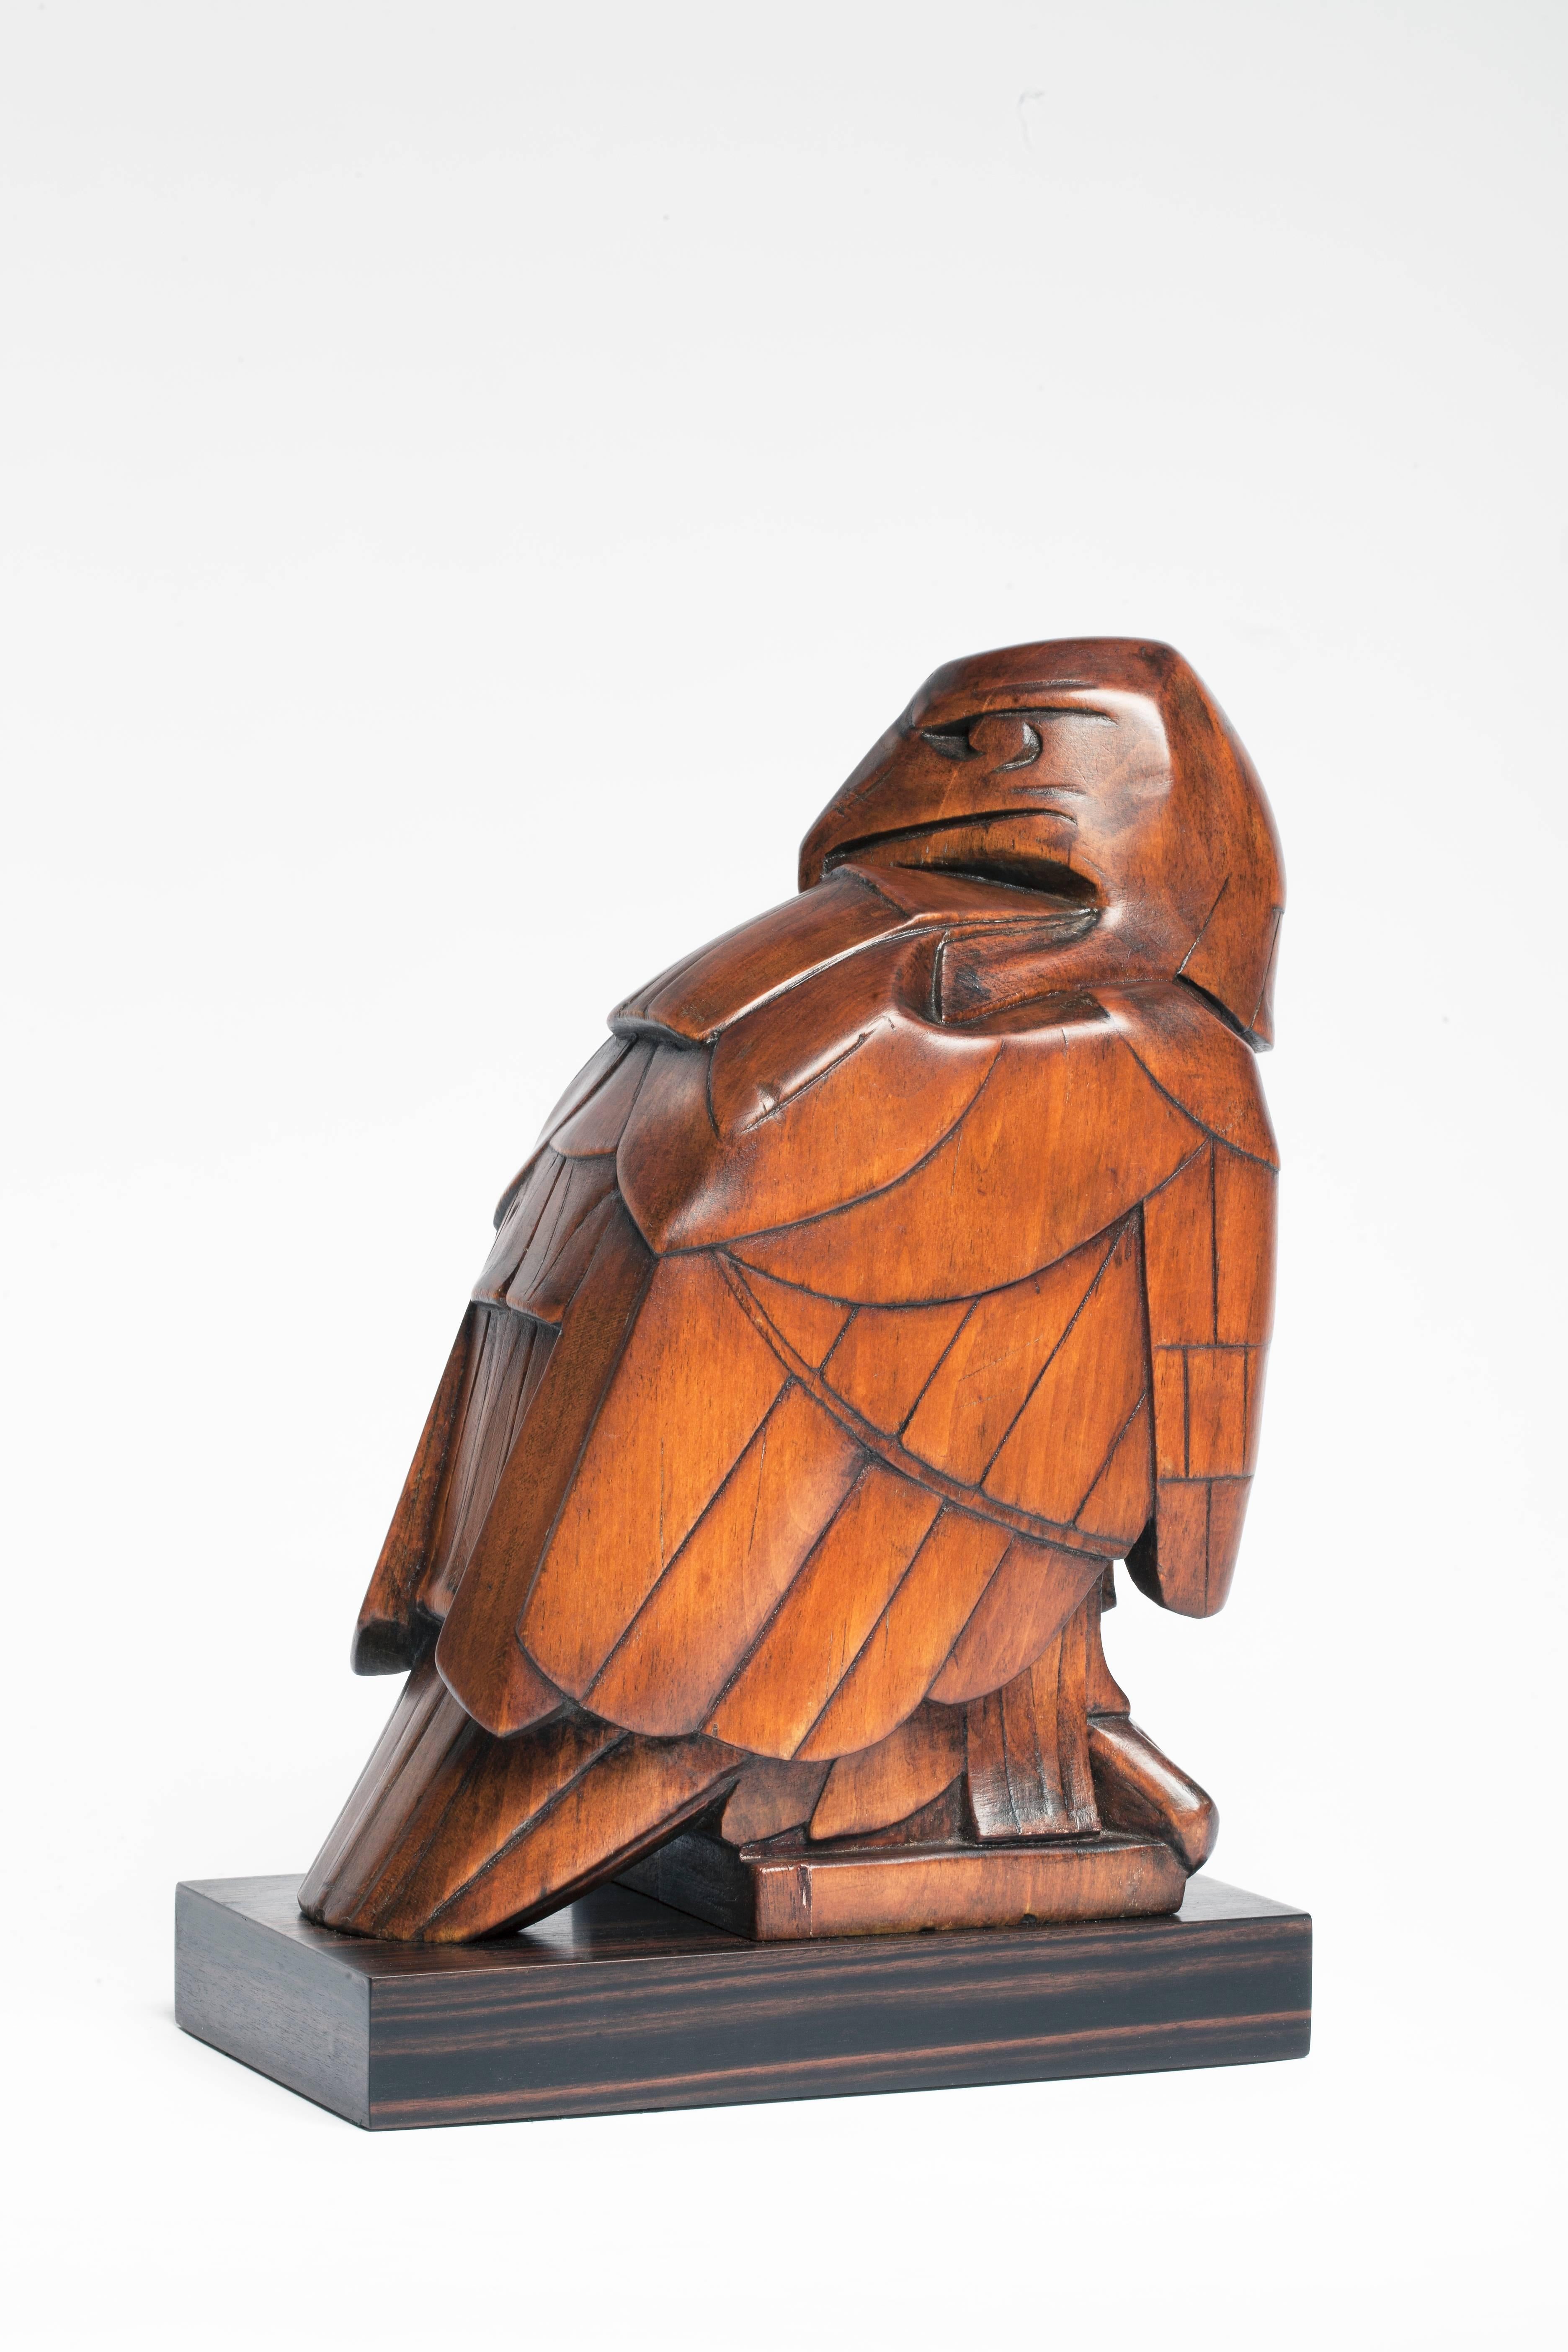 Beautiful carved wooden sculpture, designed and executed by Johan Coenraad (Jan) Altorf (1876-1955) in 1915. This piece was commisioned by Cornelis Bruynzeel sr. (1875–1956), owner of the woodworking factory De Arend (The Eagle) in Rotterdam, for